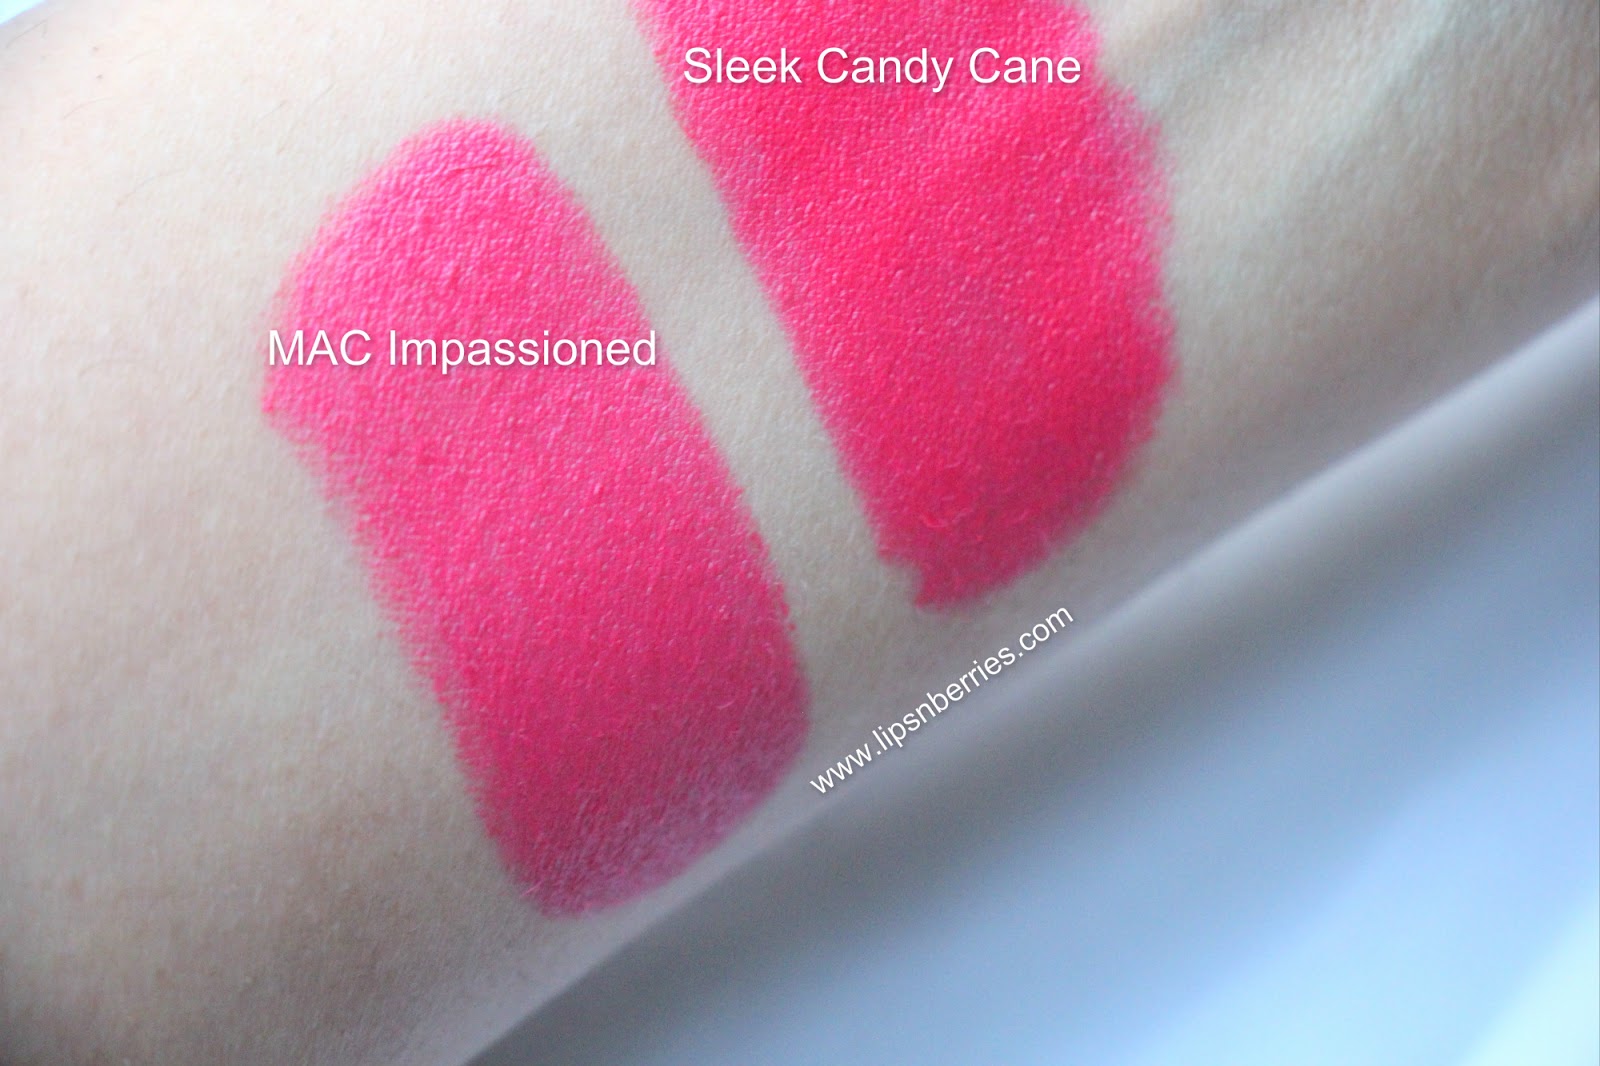 Sleek Makeup True Color Lipstick In Candy Cane A Dupe For Mac Party Parrot Impassioned Lips N Berries